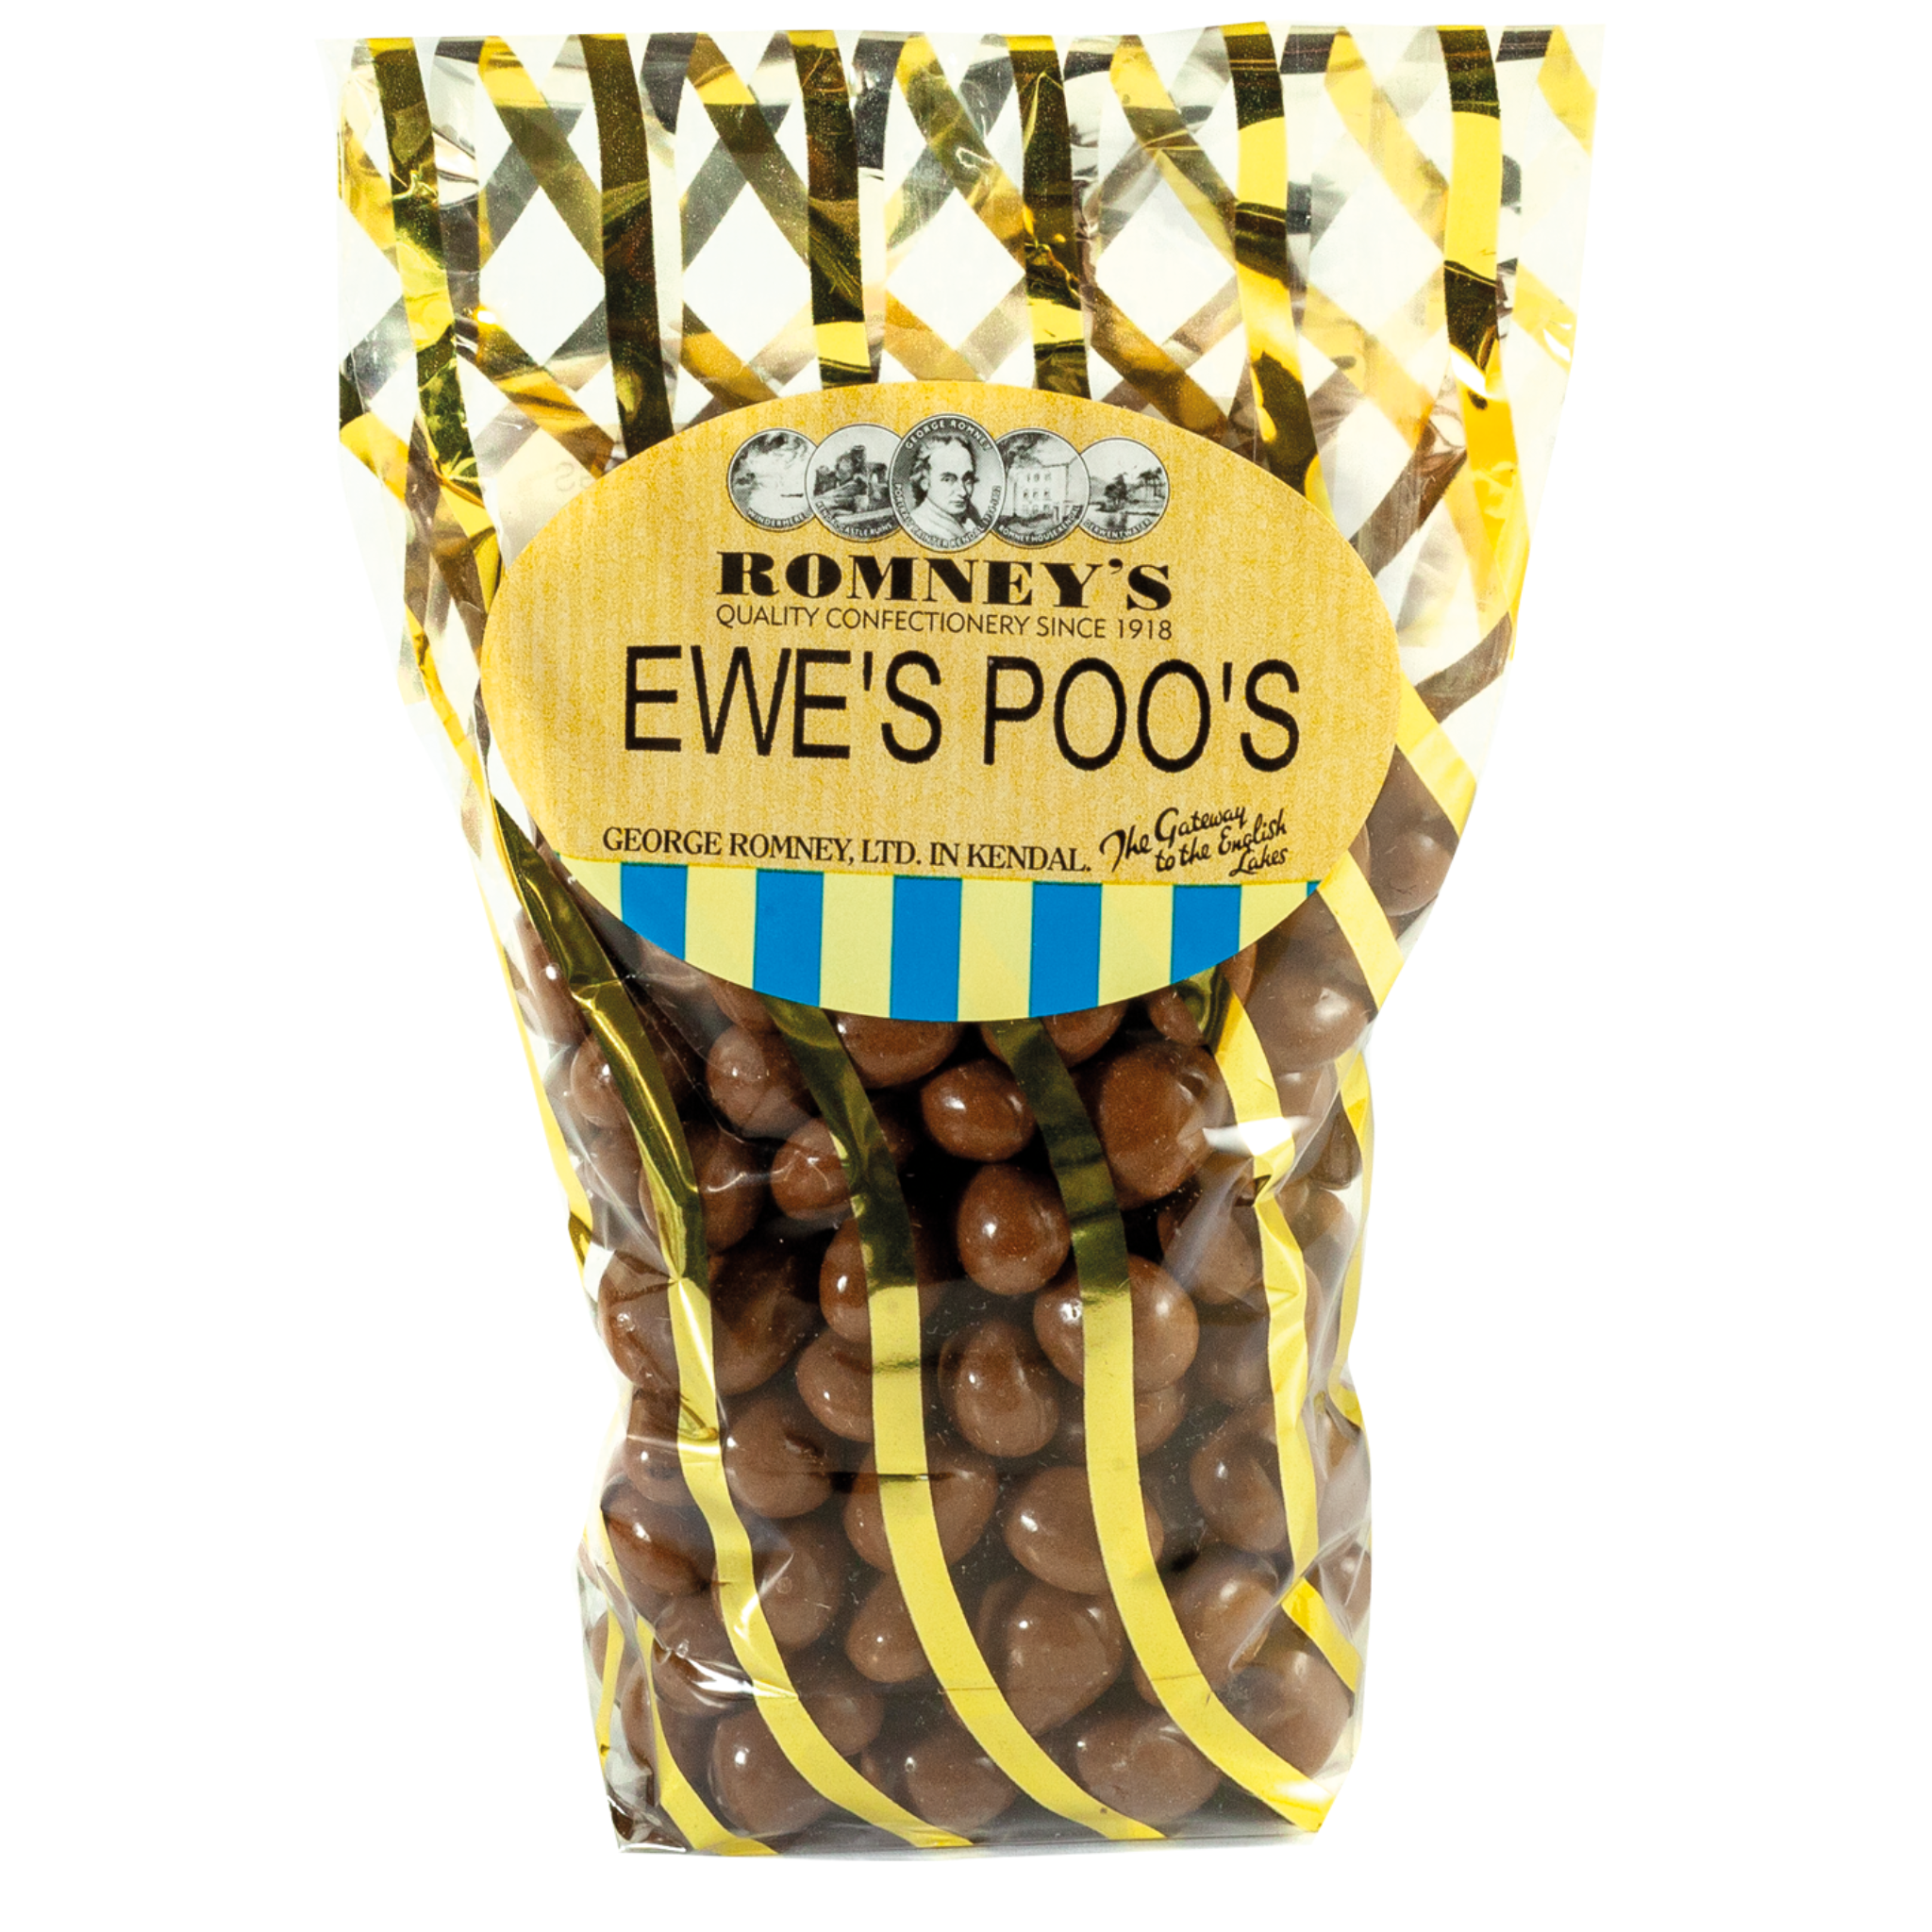 A transparent bag with gold foil detail, containing chocolate coated raisin confectionery. The product features Romney's label featuring the company logo and the product title 'EWE'S POO'S'.